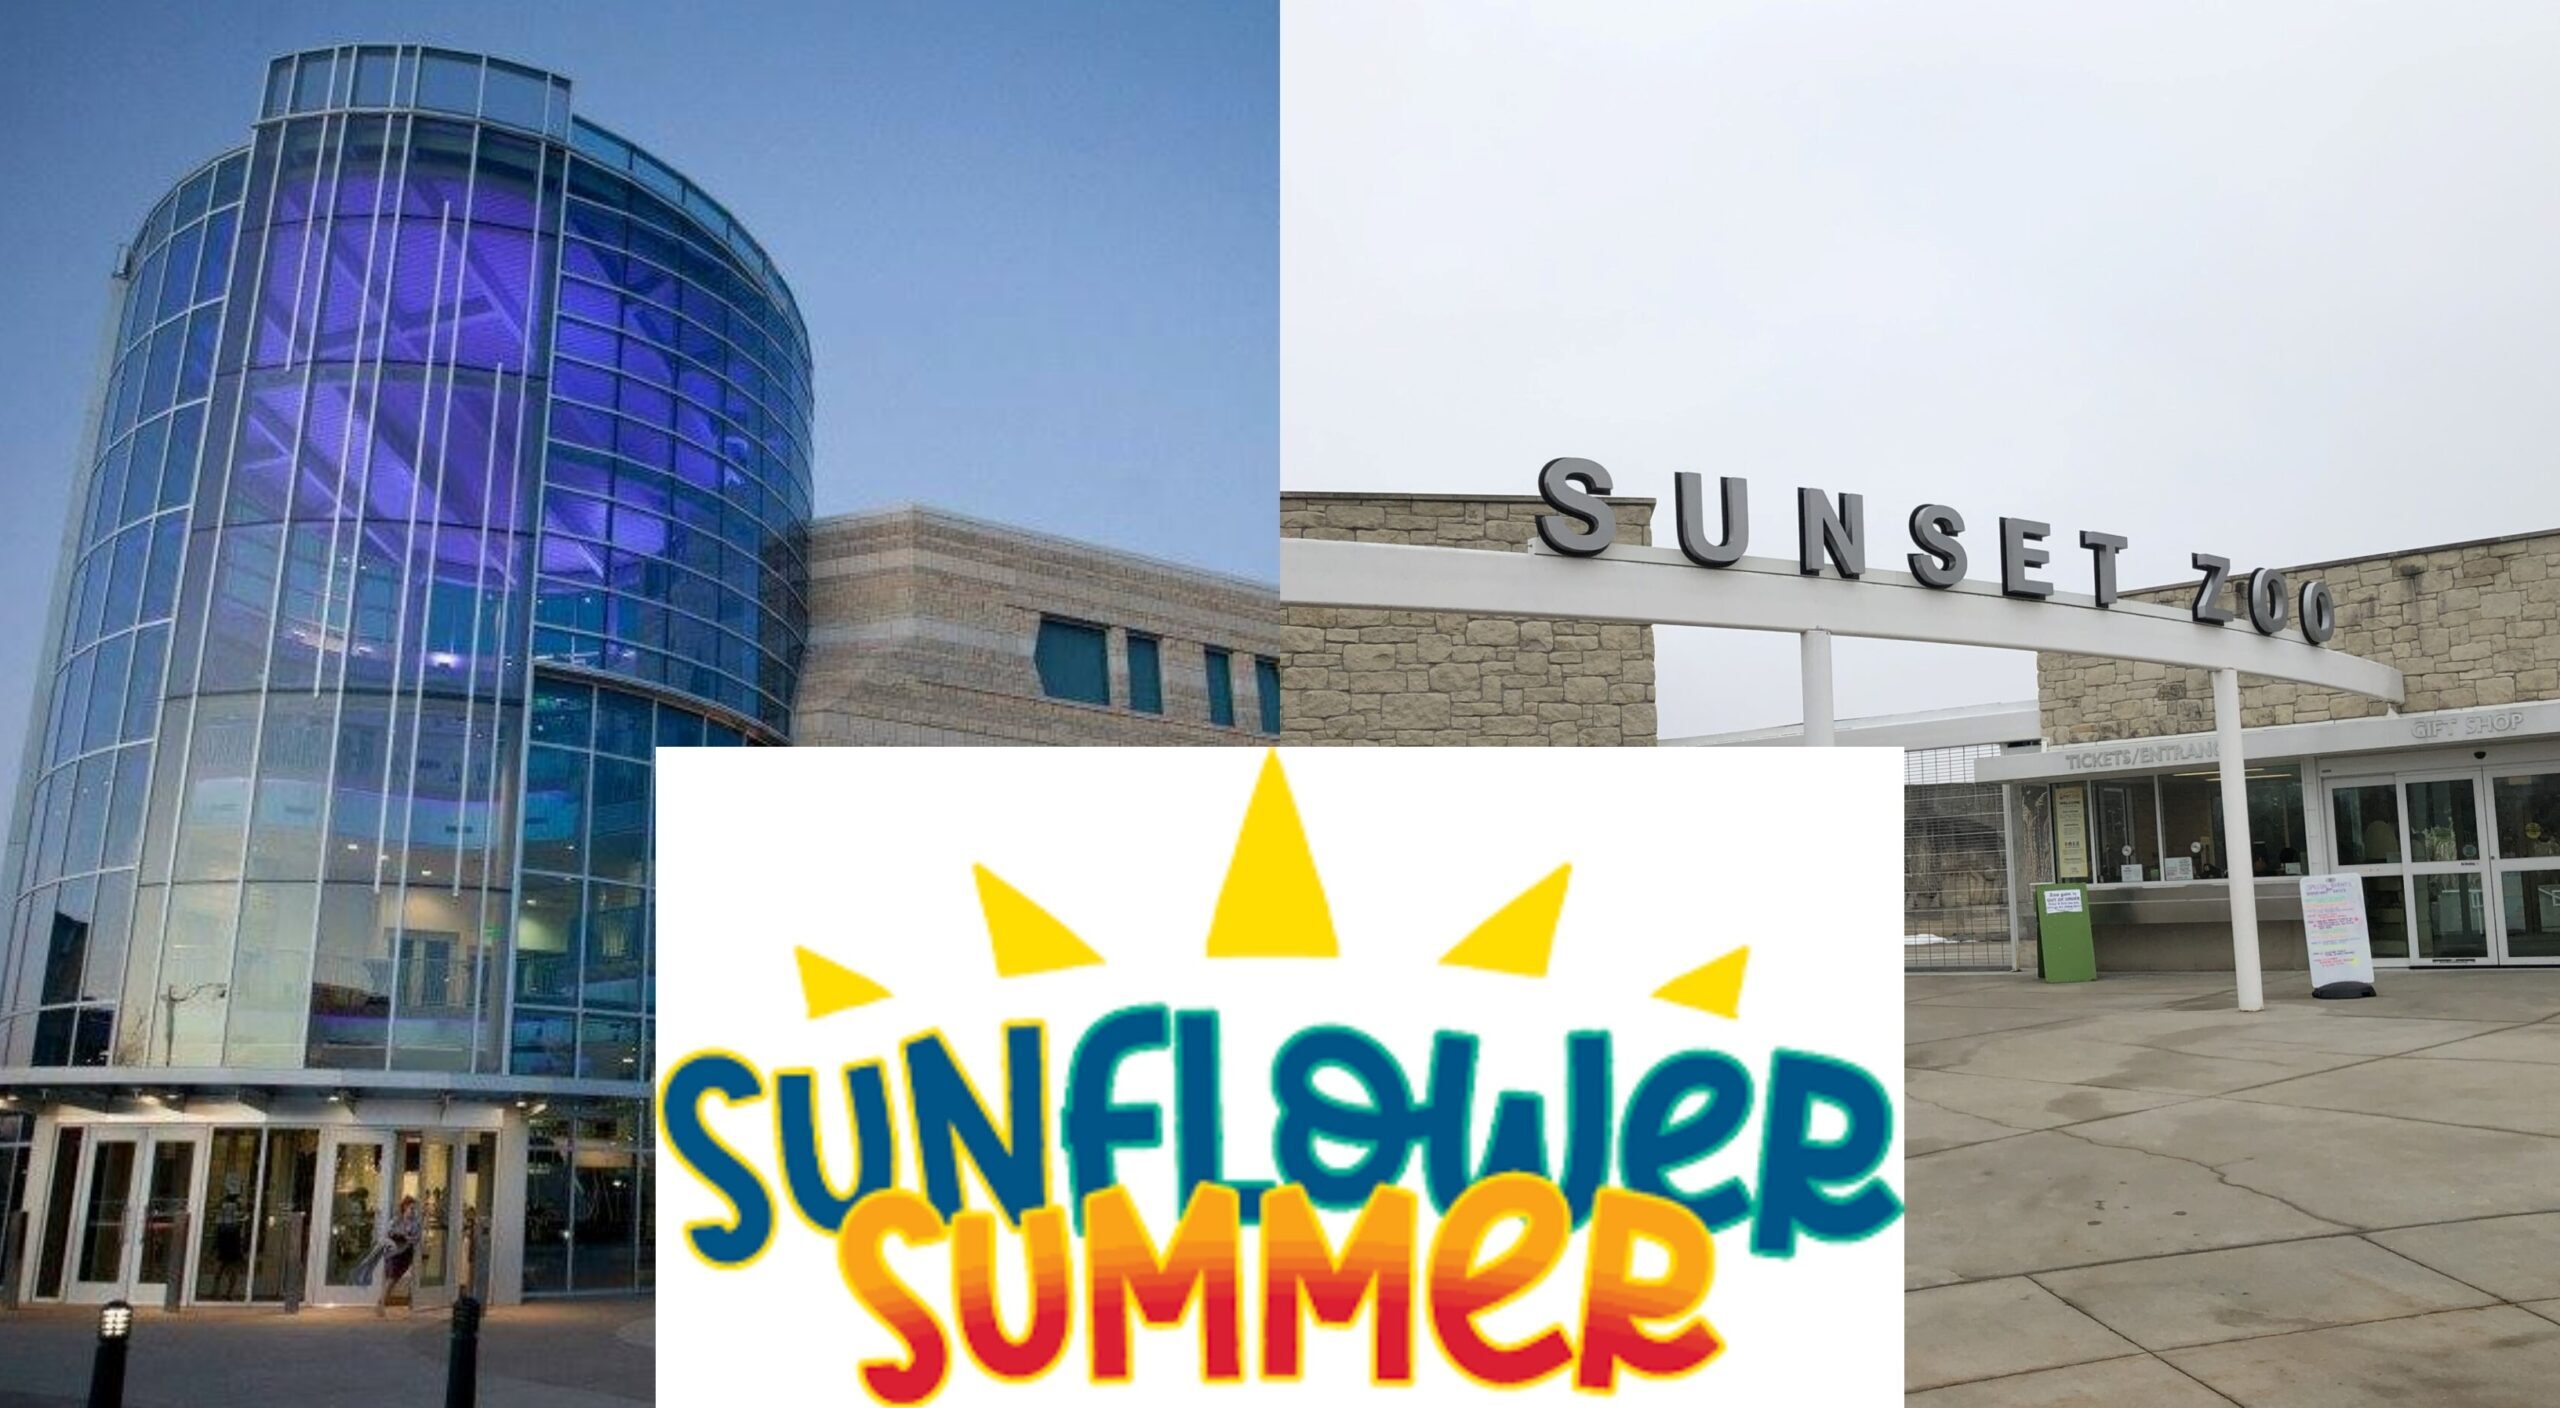 Sunflower Summer program offers education and fun for Kansas students